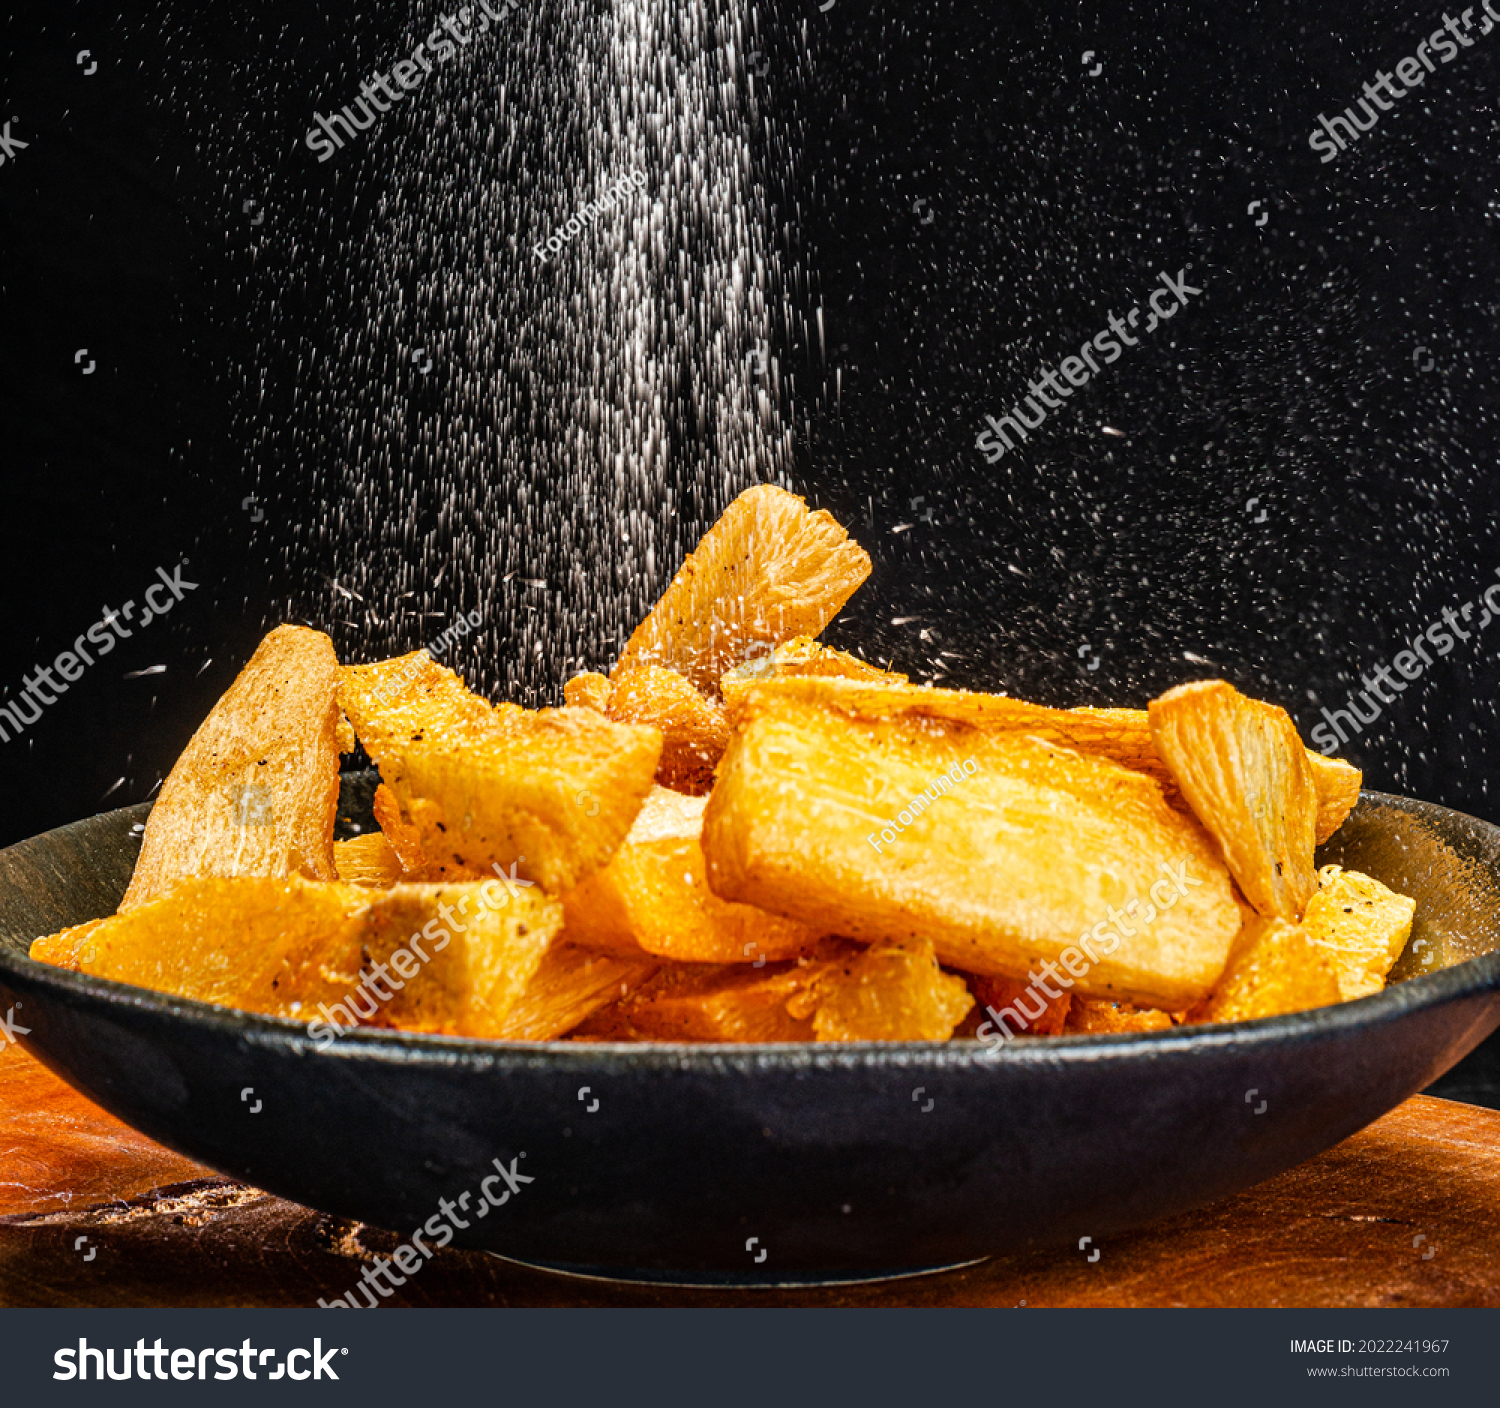 Salt being poured over Fried manioc portion, traditional Brazilian bar food, served in a rustic dish on wood and black background. selective focus #2022241967